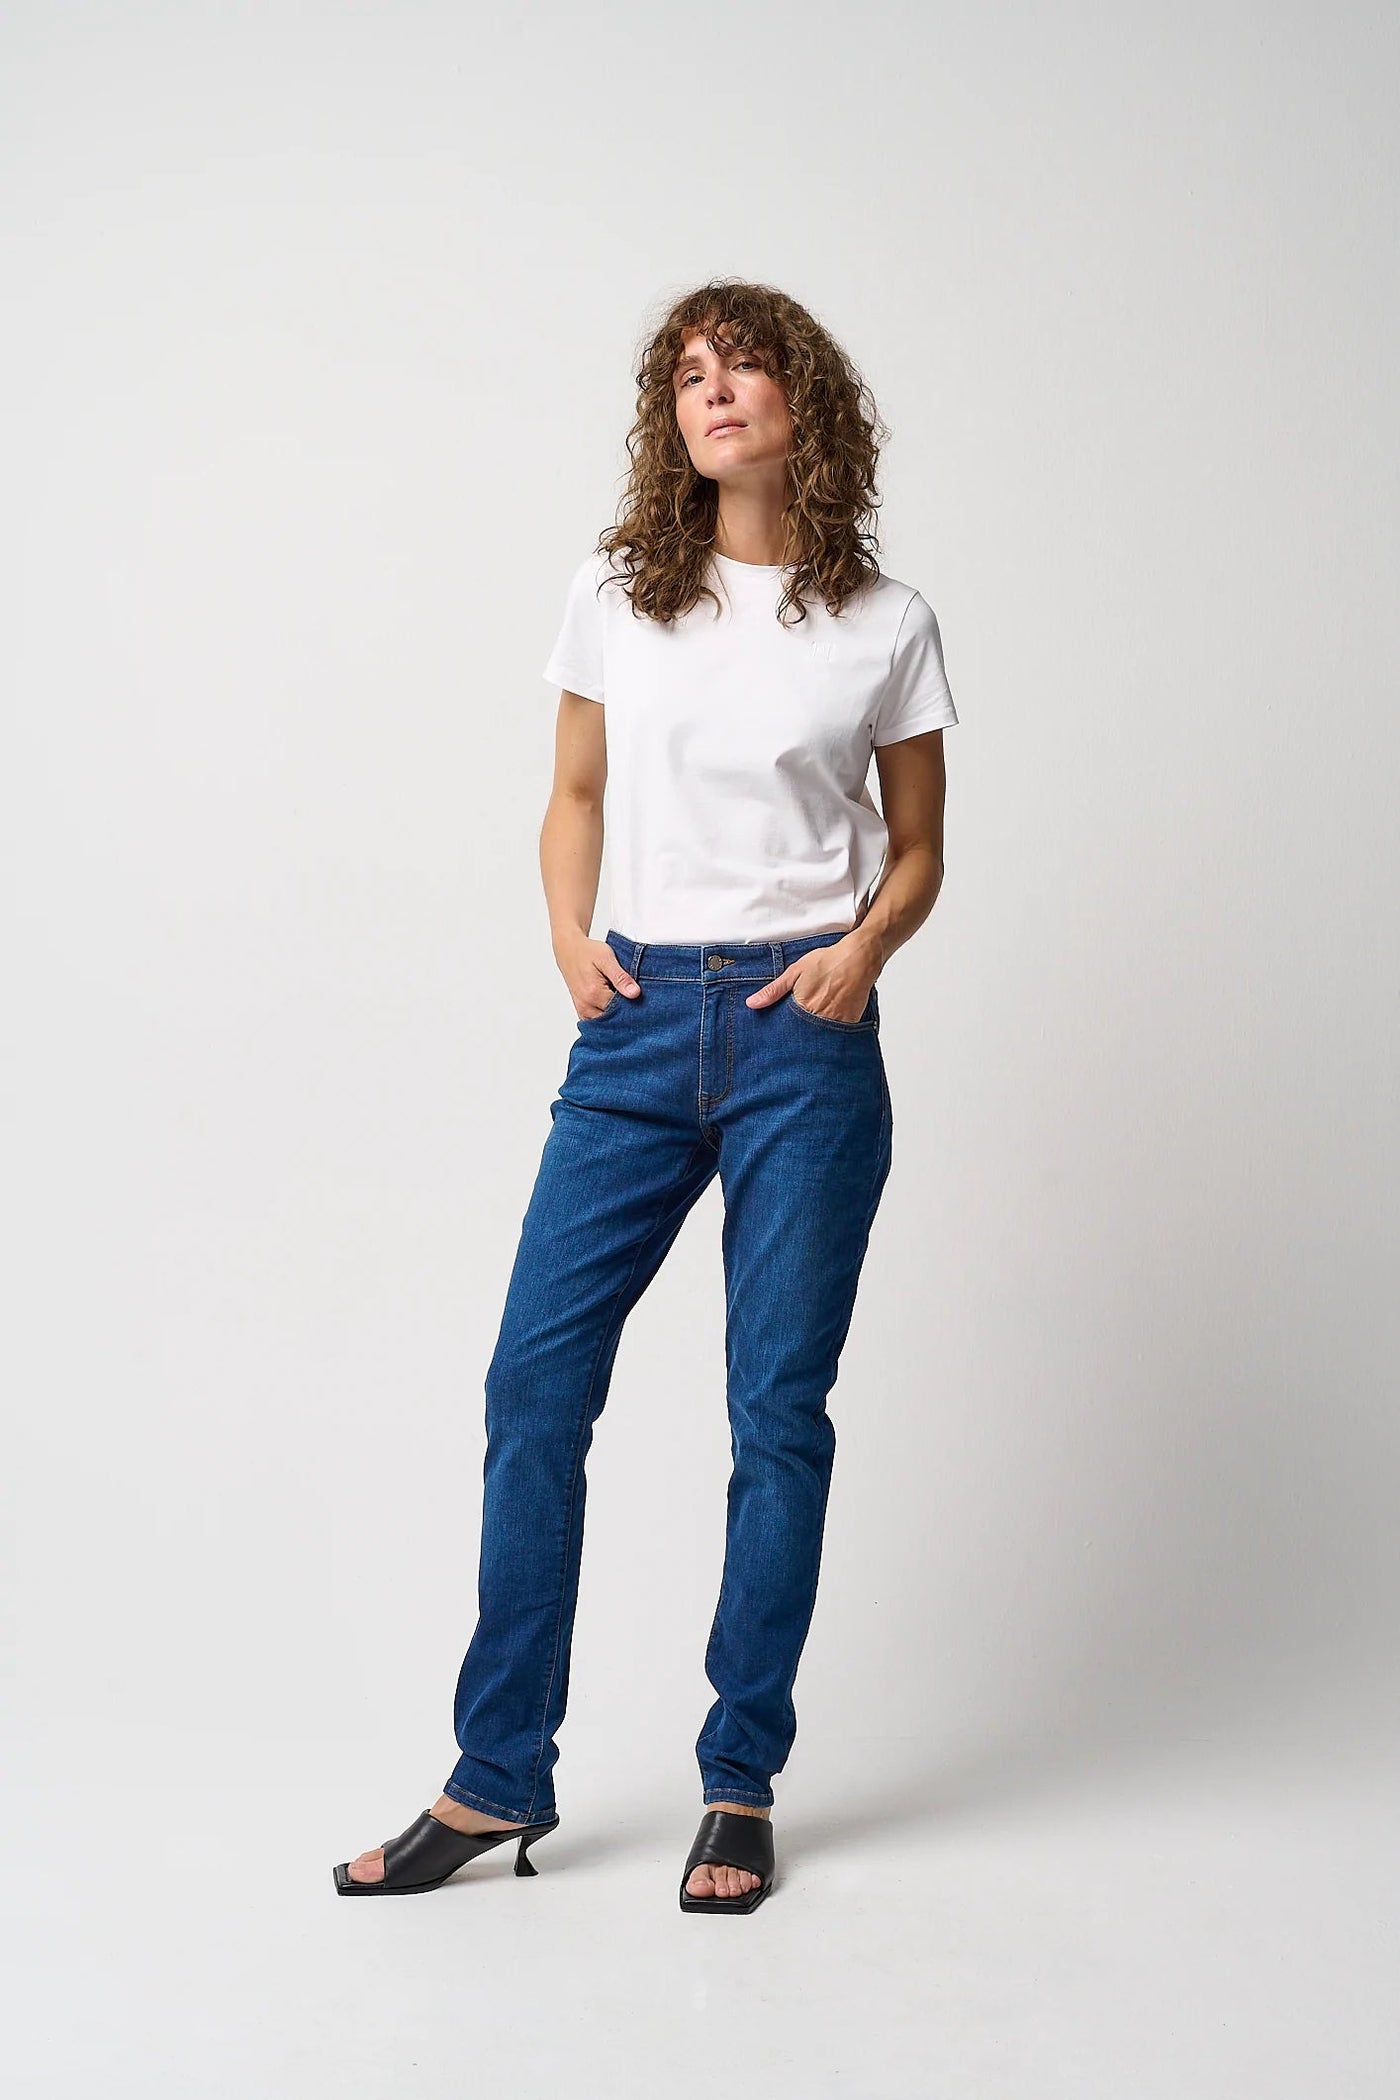 Pieszak PD Helene Jeans SWAN Wash Exclusive Osaka-Womens-Ohh! By Gum - Shop Sustainable